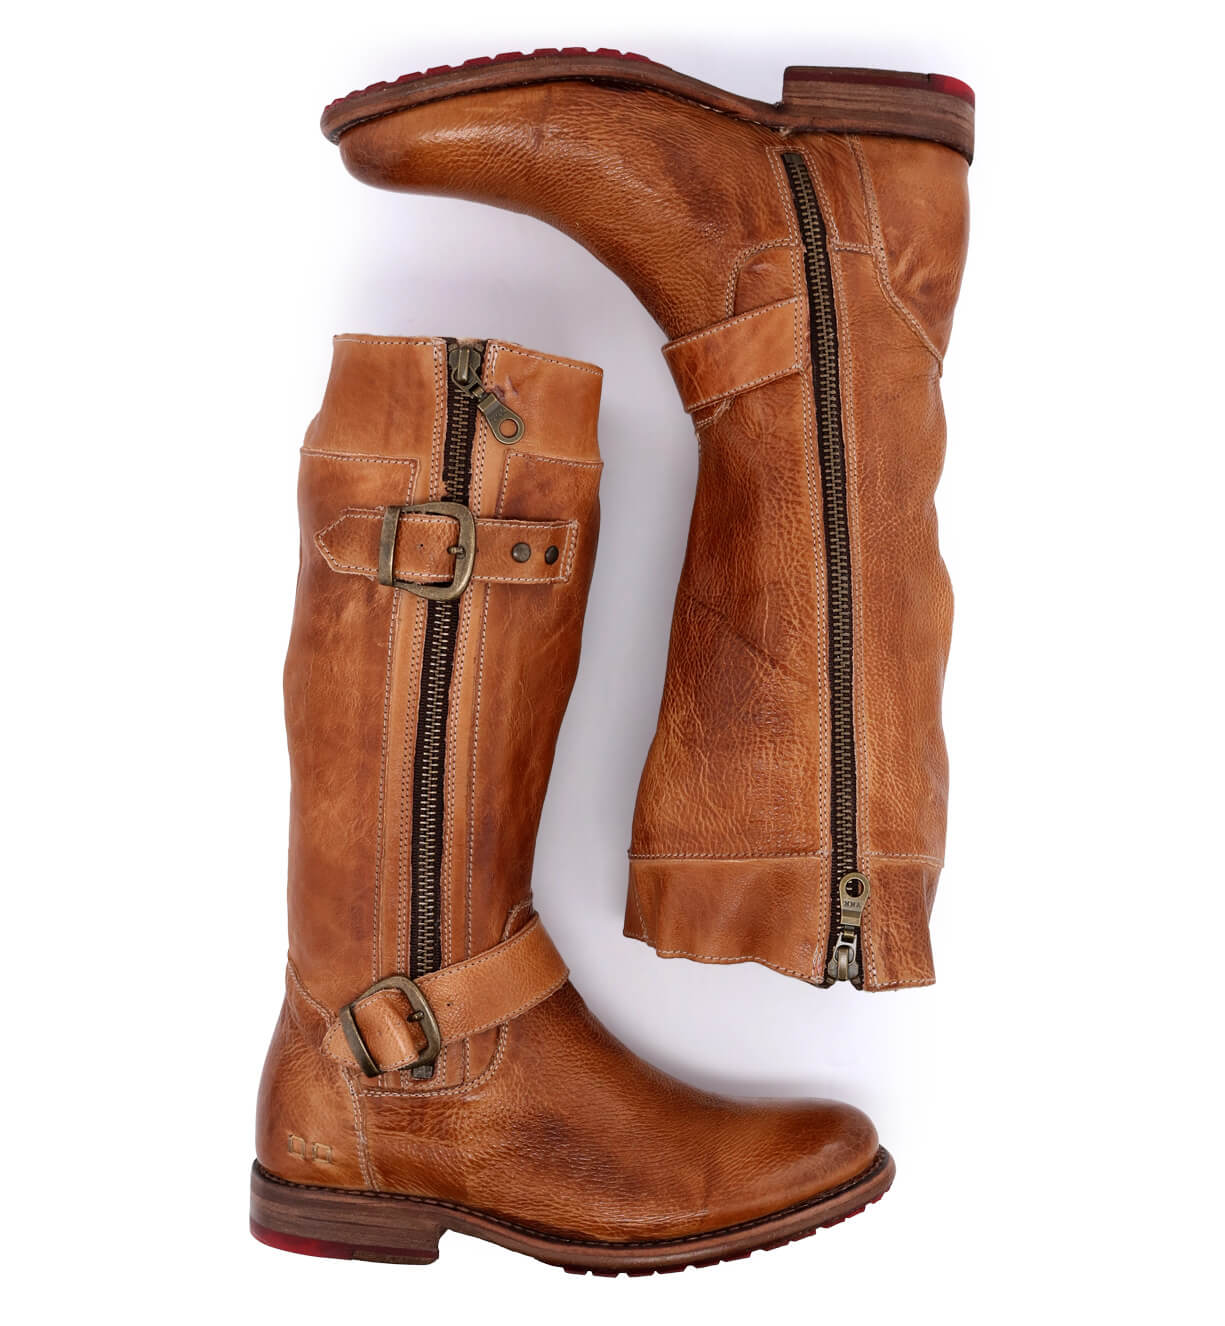 A pair of Gogo Lug tan leather boots with zippers and buckles by Bed Stu.